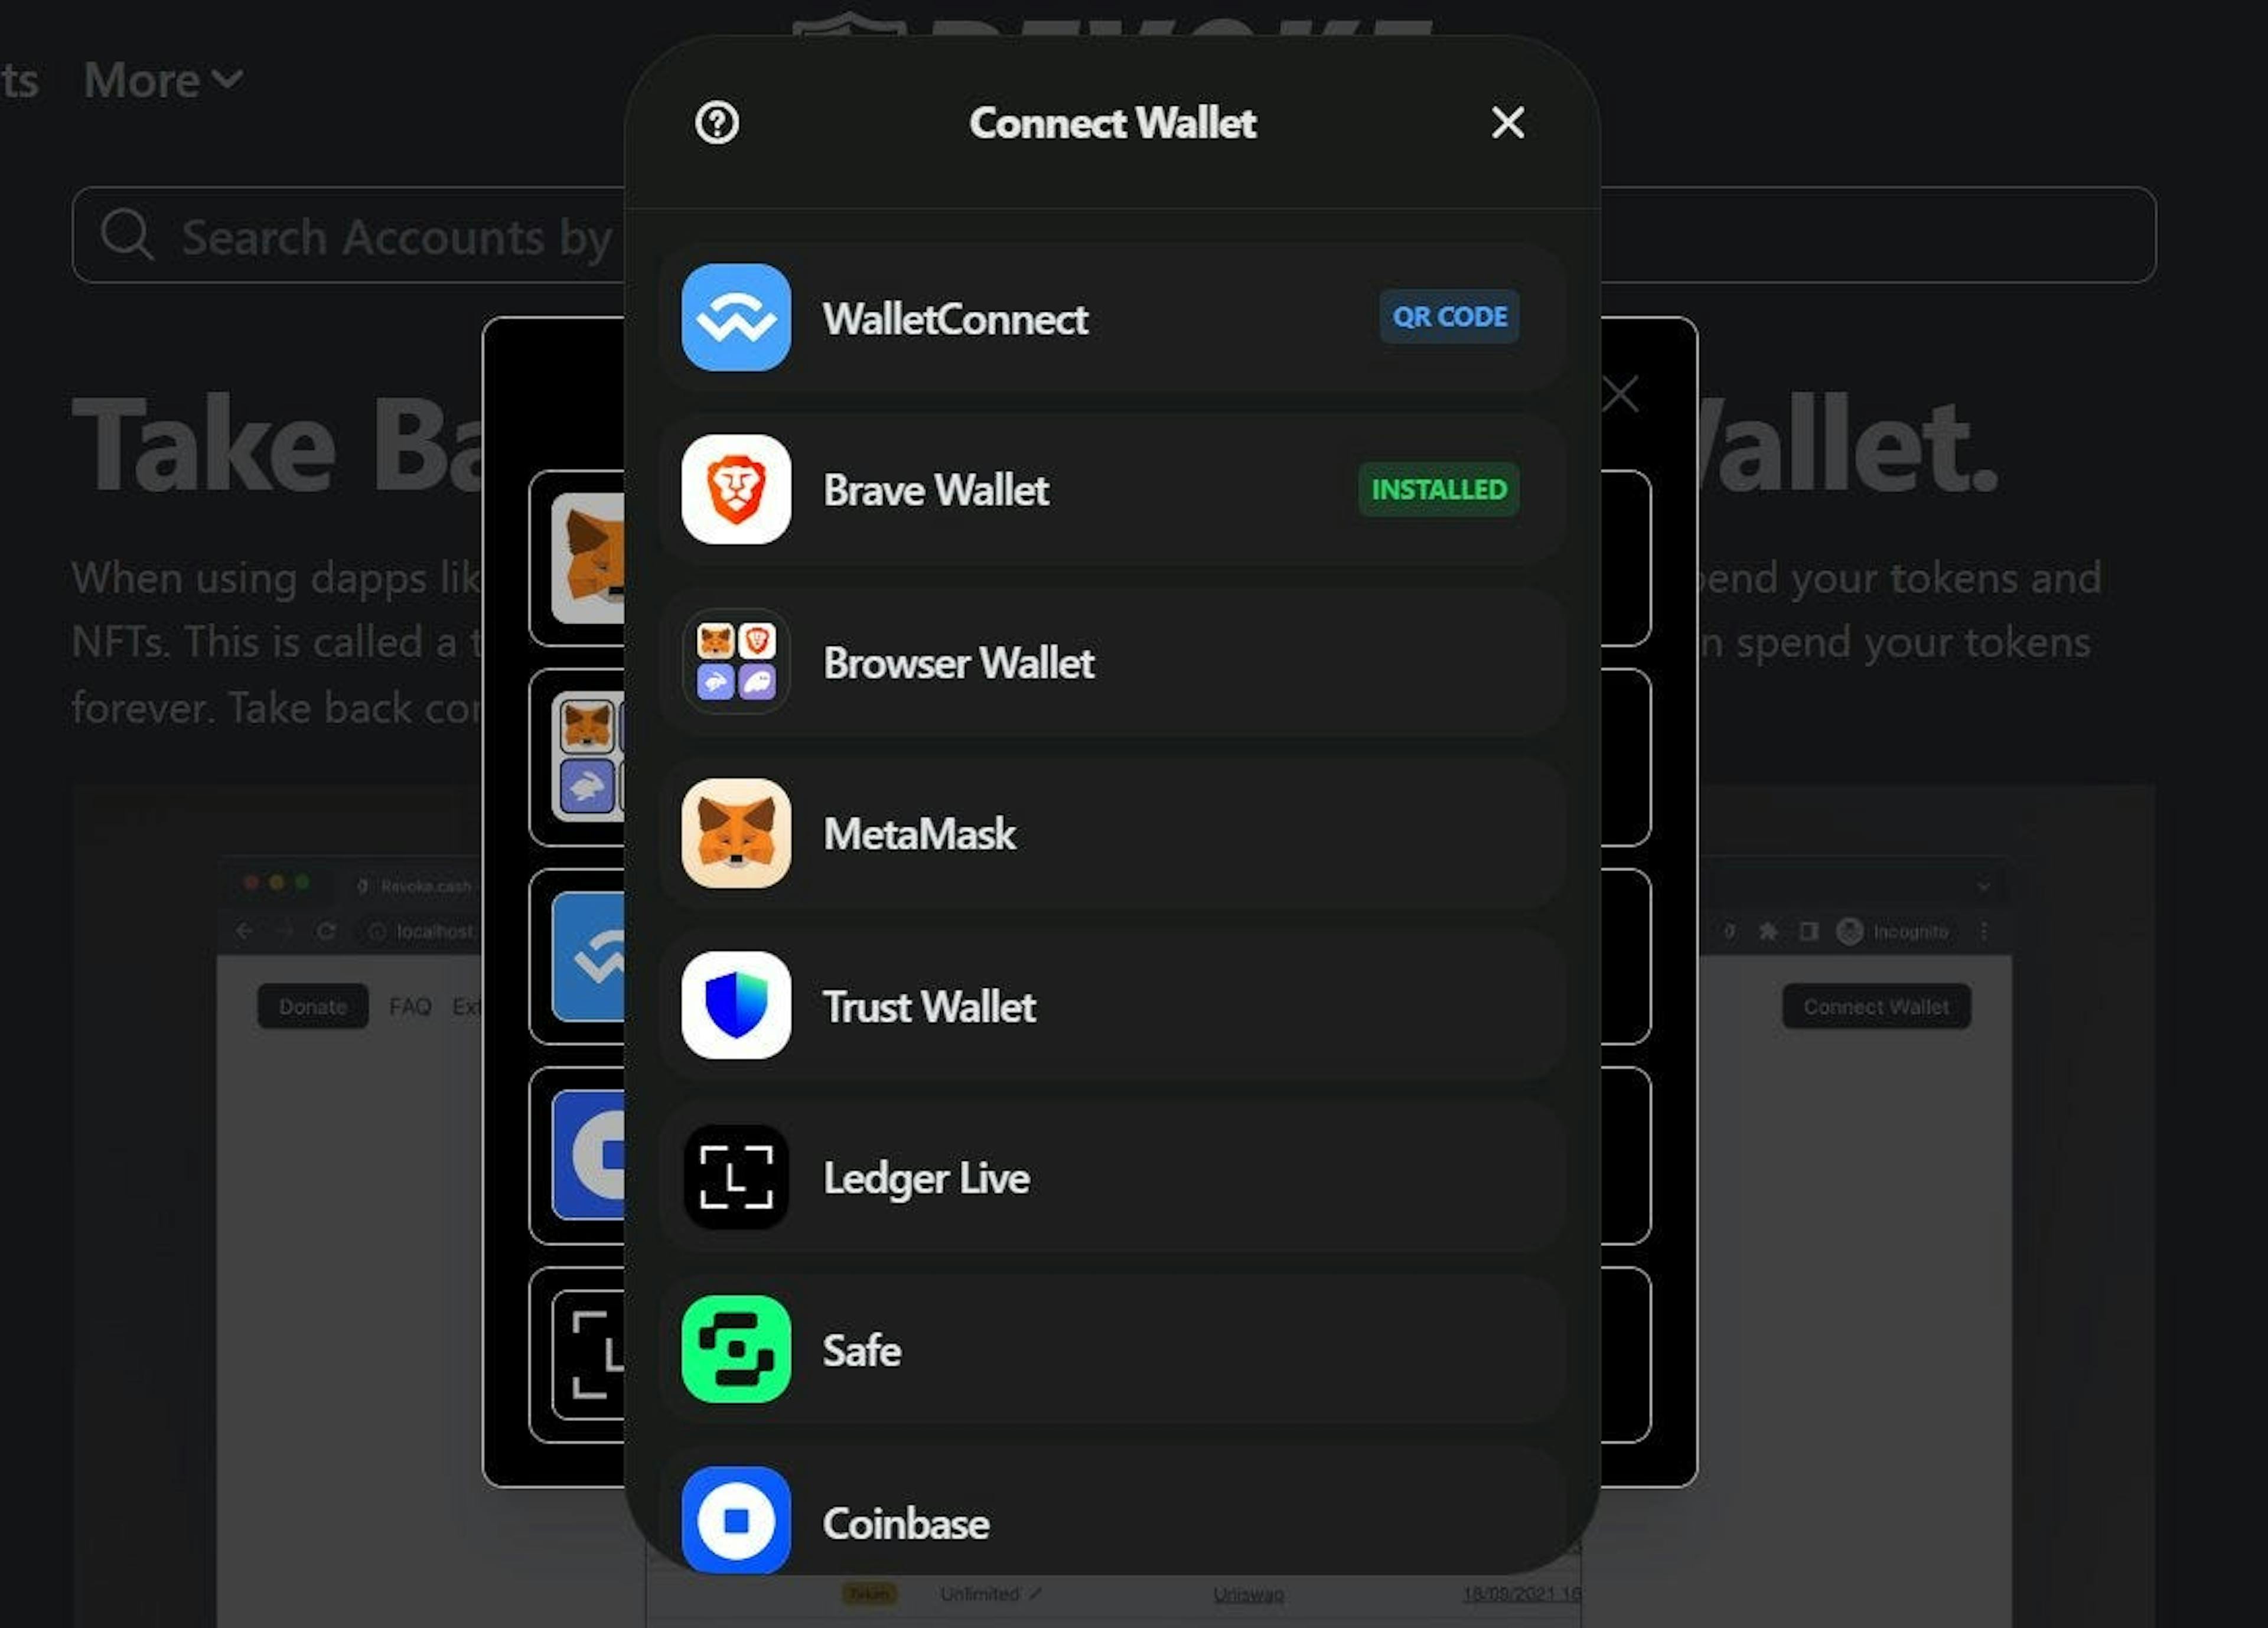 The malicious Connect Wallet popup is opening on top of the actual modal like this